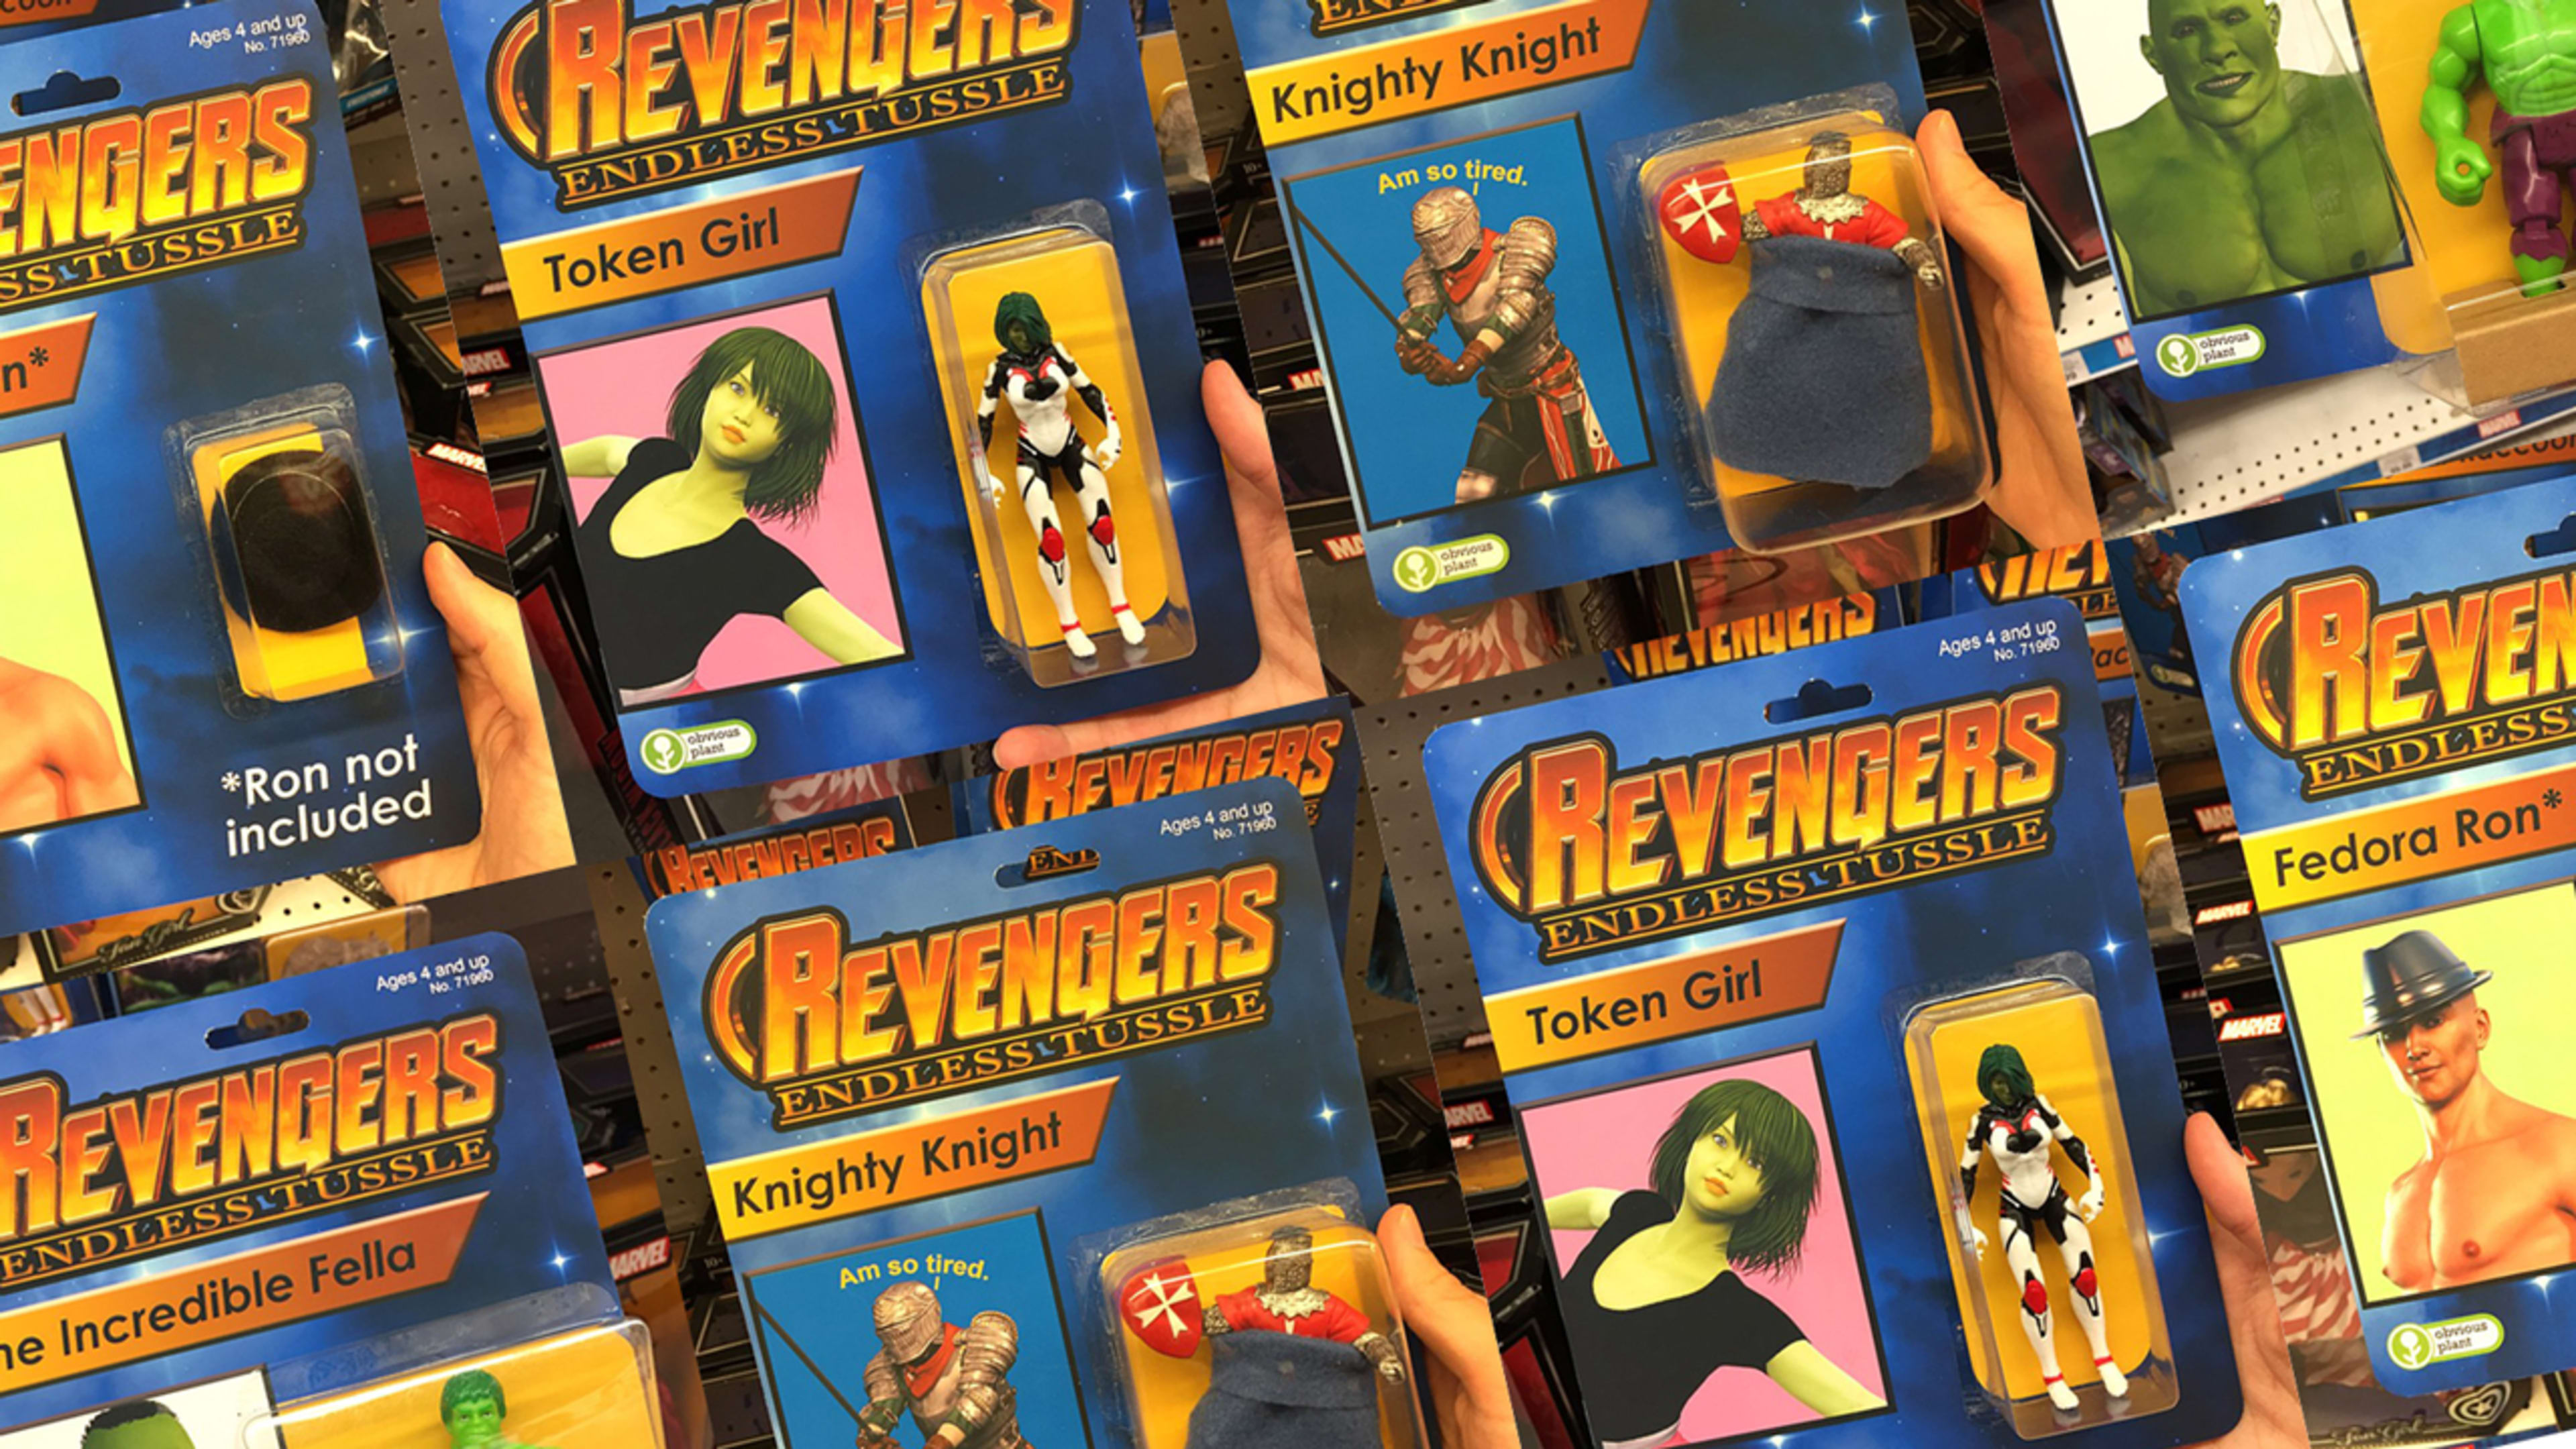 “Revengers” Are the Avengers Knockoffs You Didn’t Know You Needed